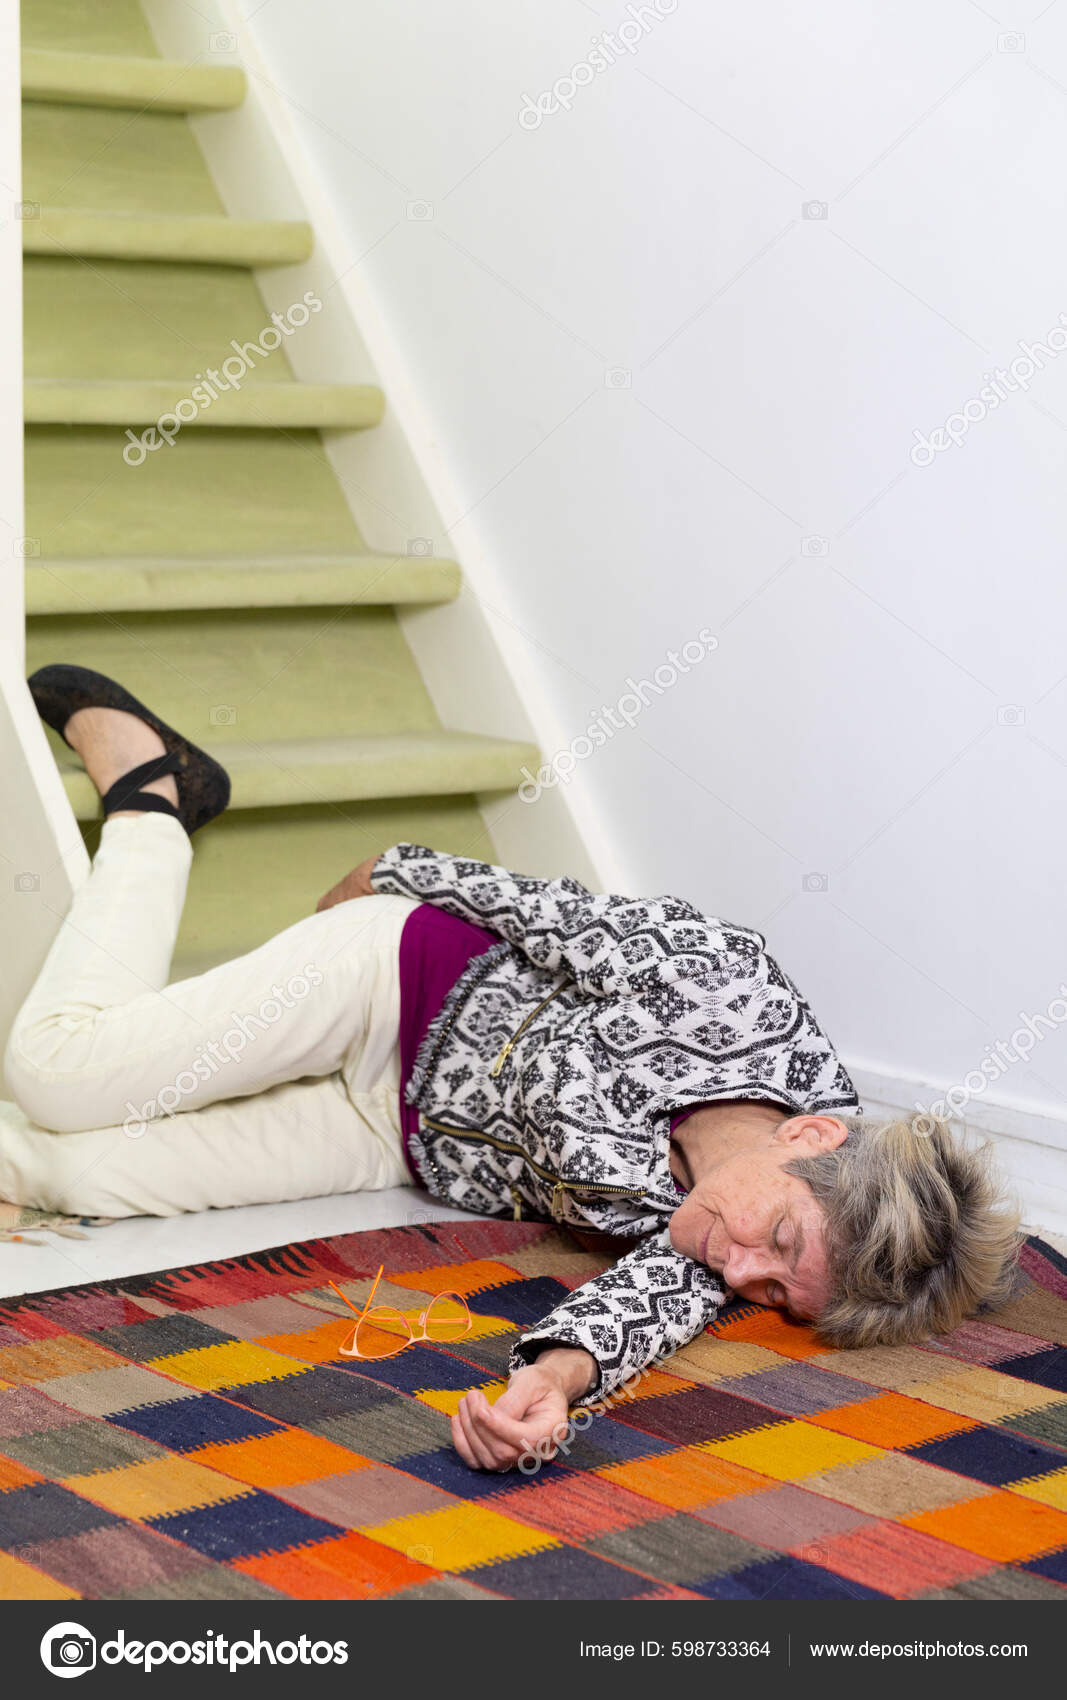 Elderly Woman Who Has Fallen Stairs Stock Photo by ©imagepointfr